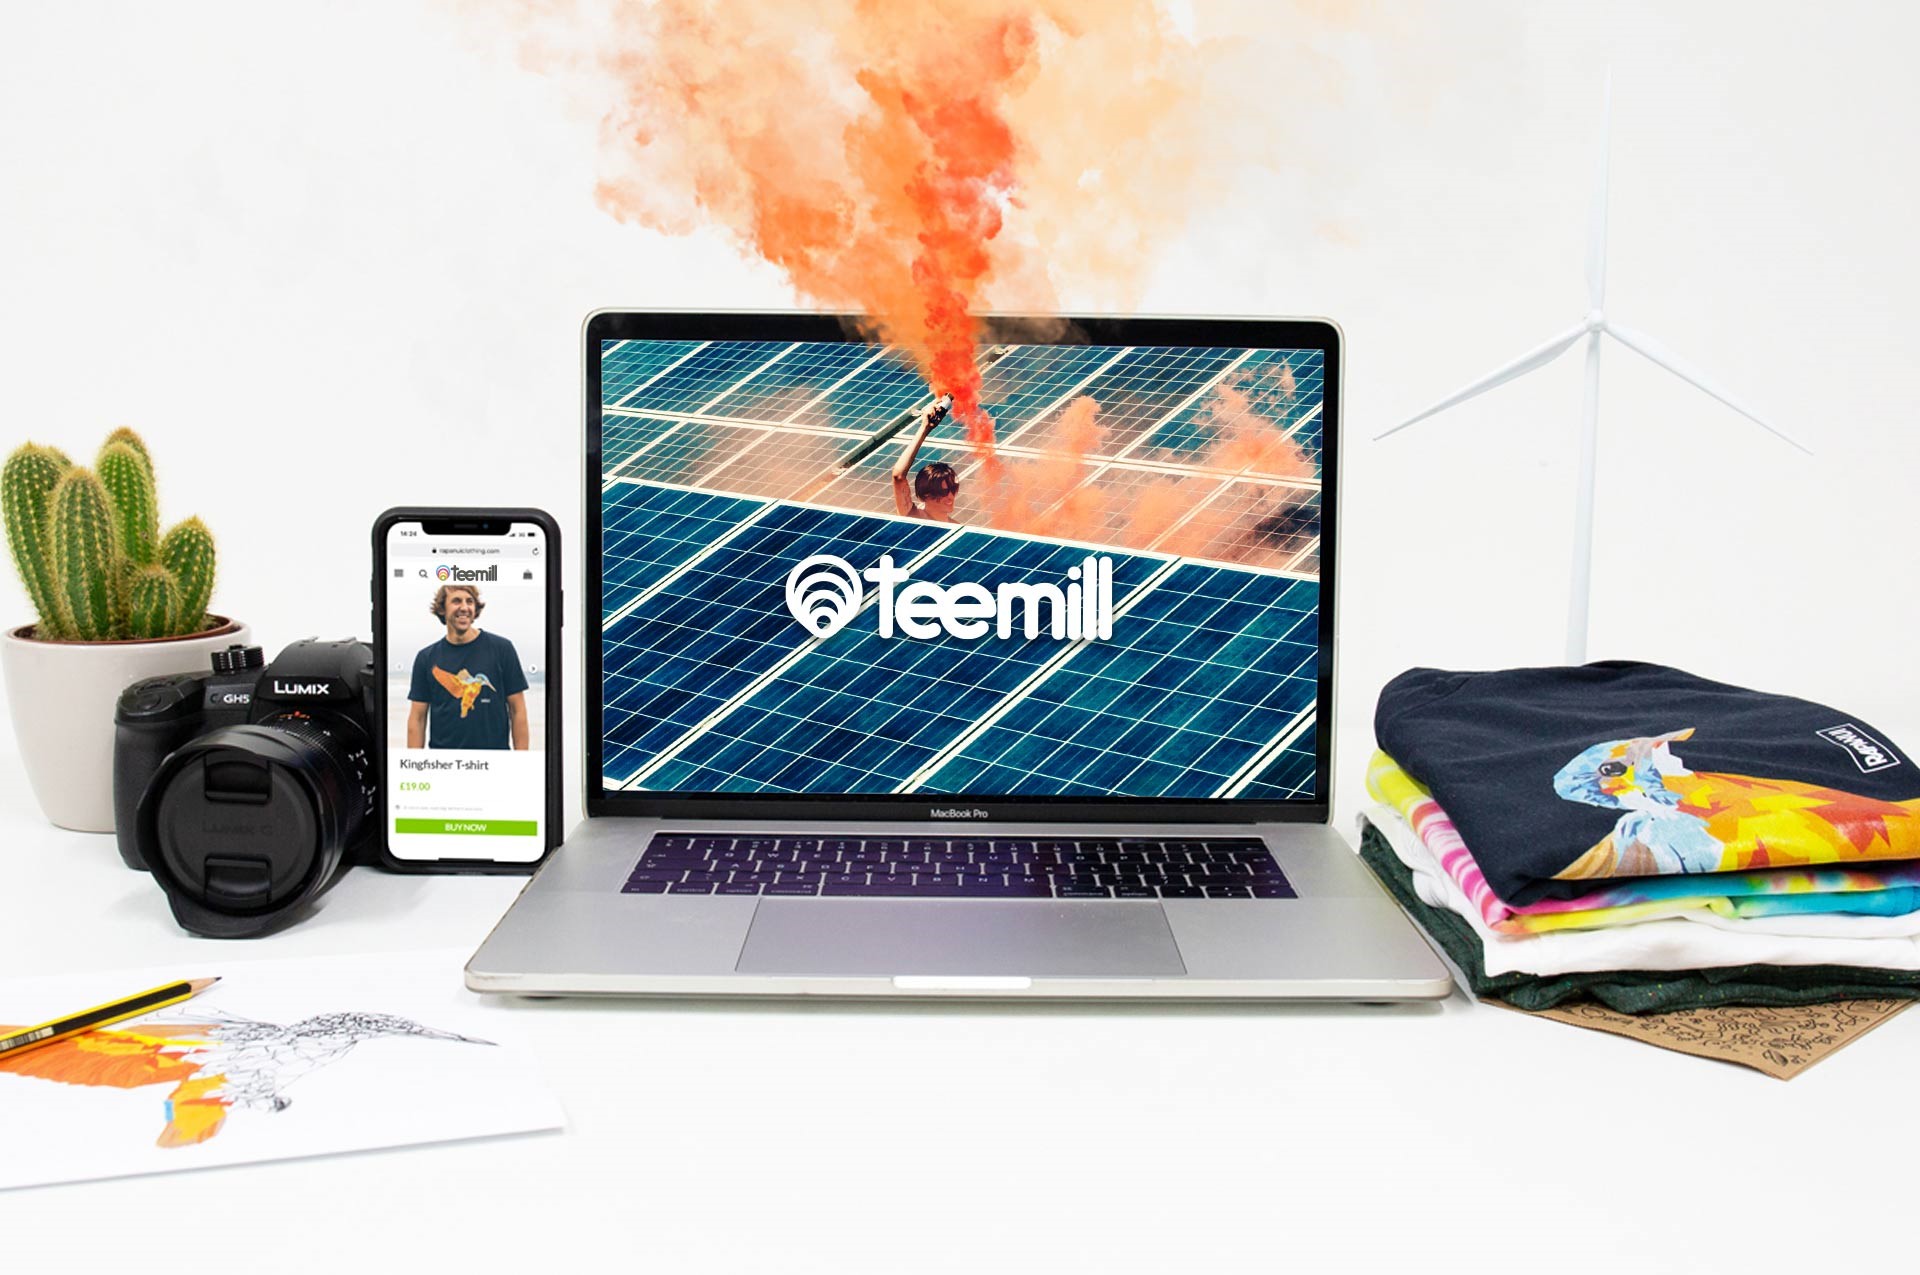 Image of laptop with teemill logo as homescreen